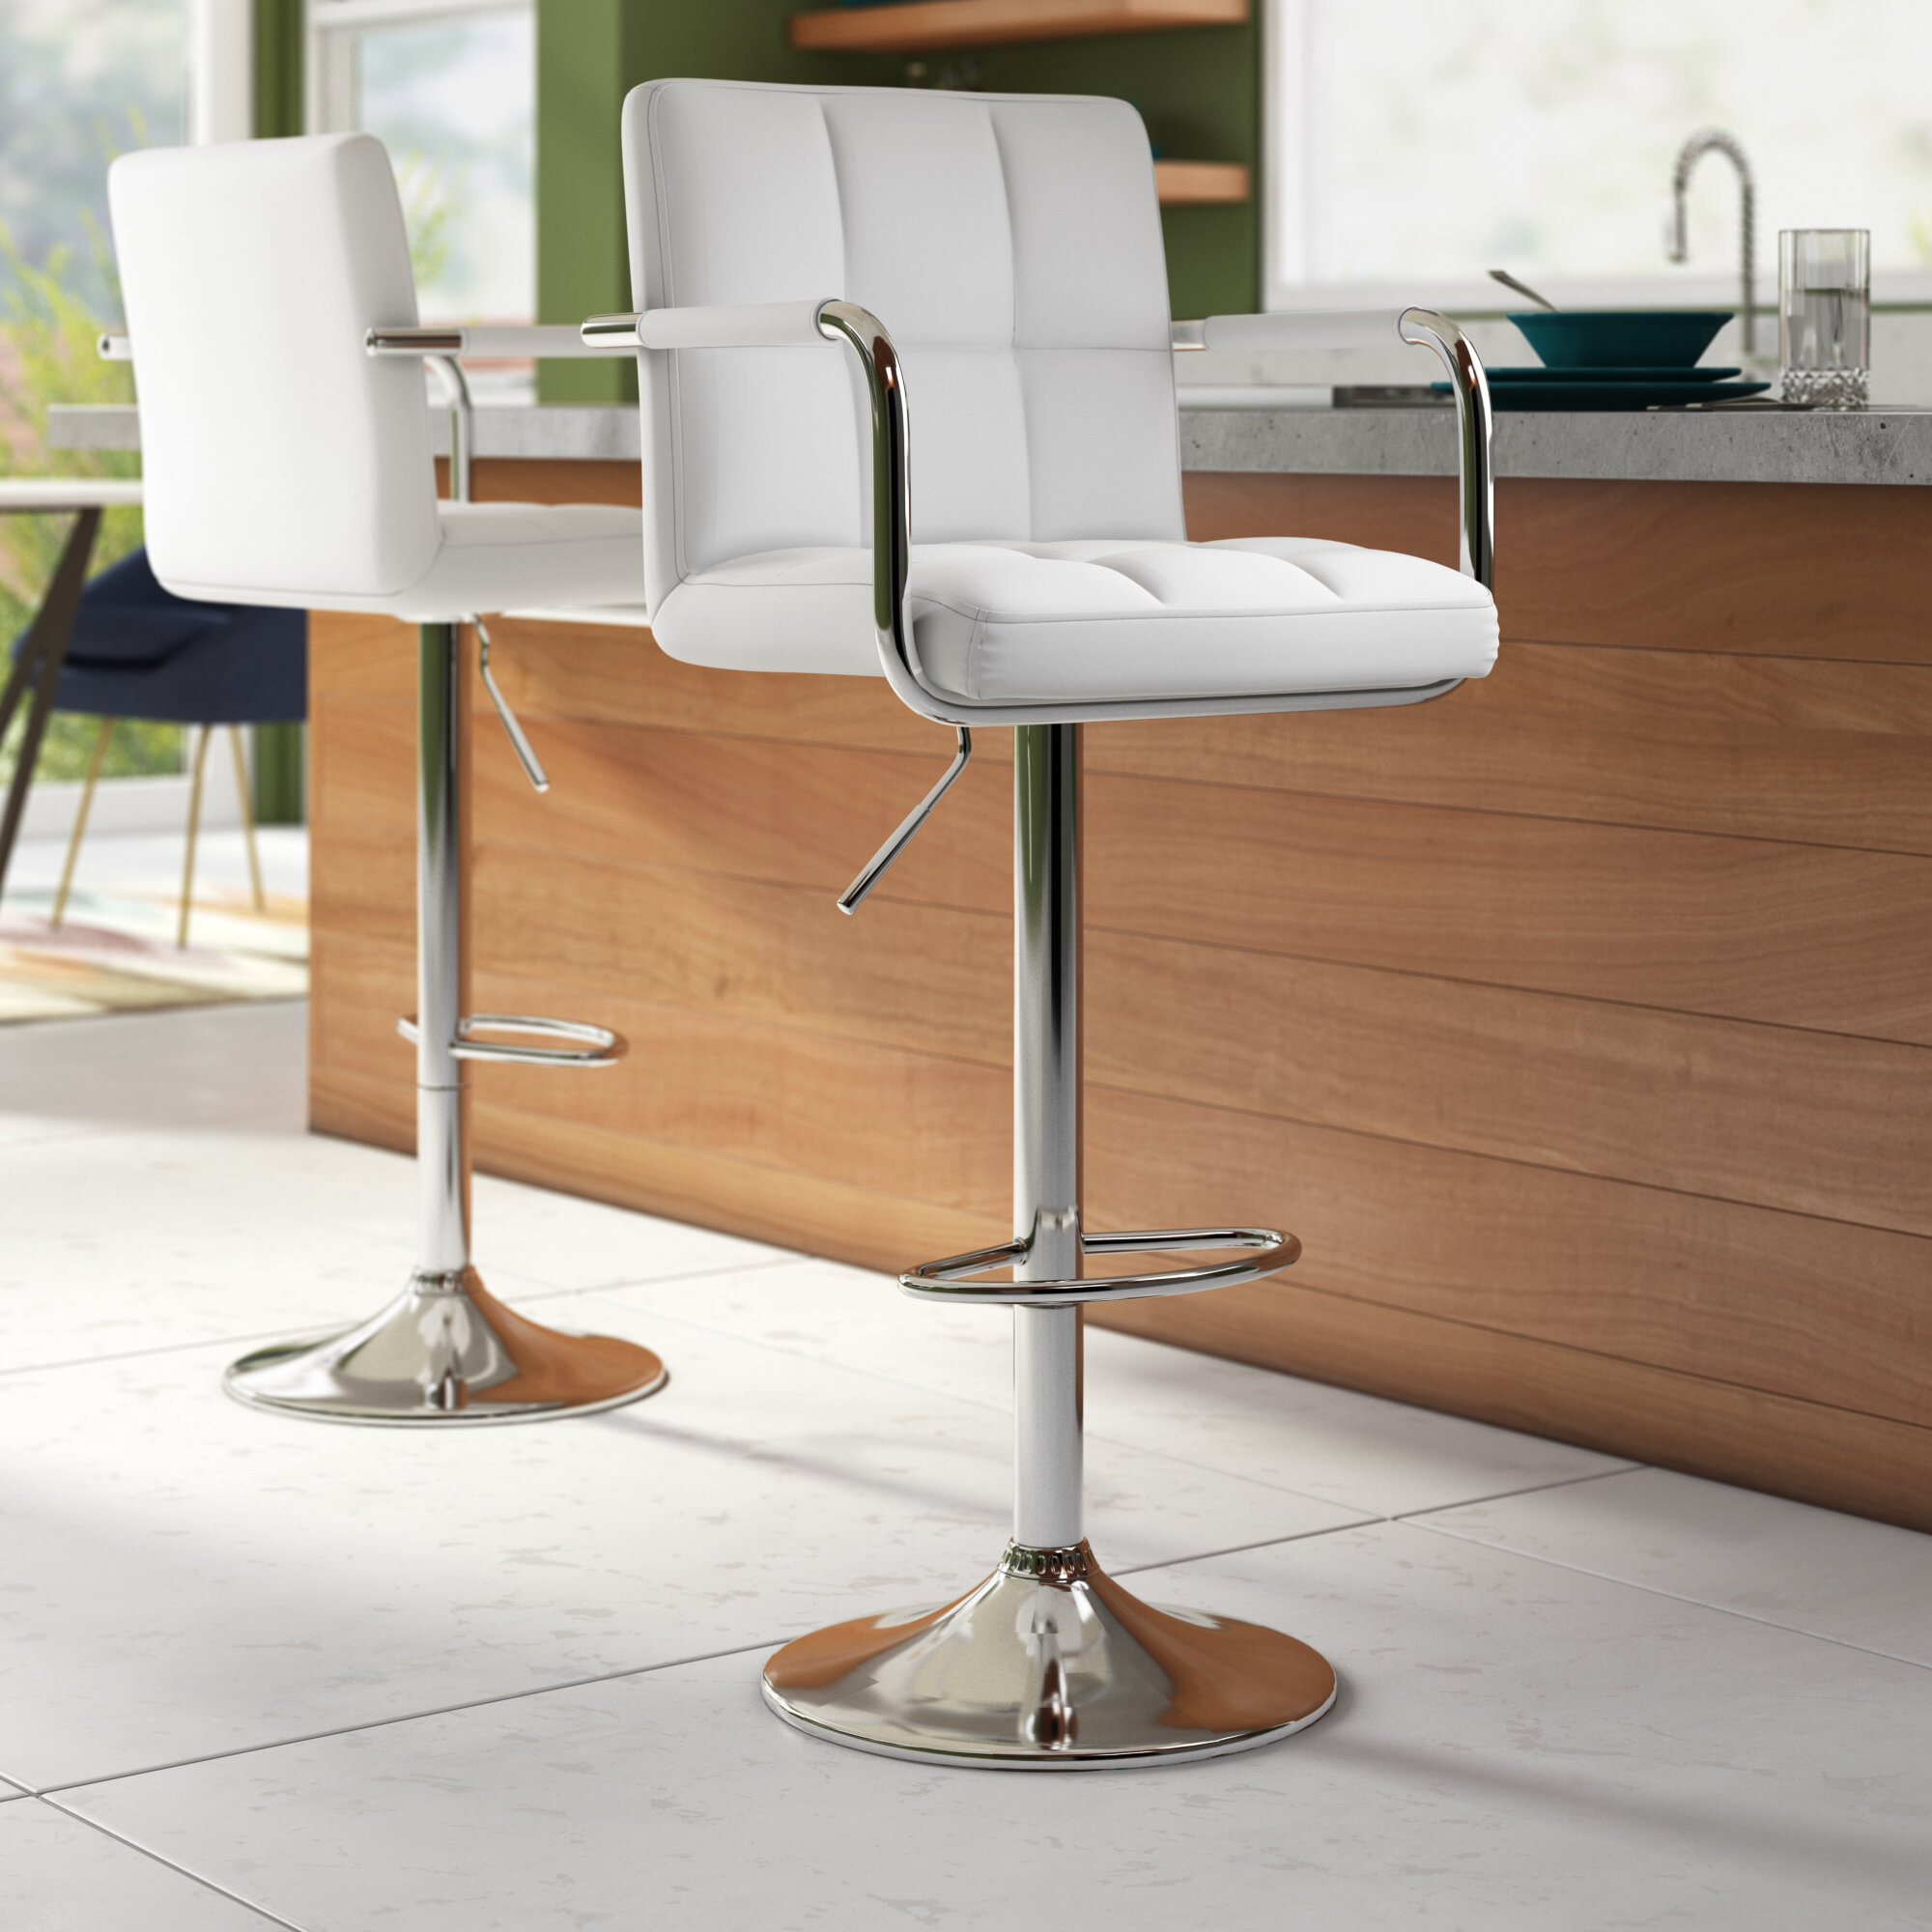 Color : Black Color : White Bar Stool Bar Stools Counter Height Swivel Stool PU Leather Modern Height Adjustable Swivel Barstools Hydraulic Chair Bar Stools,red